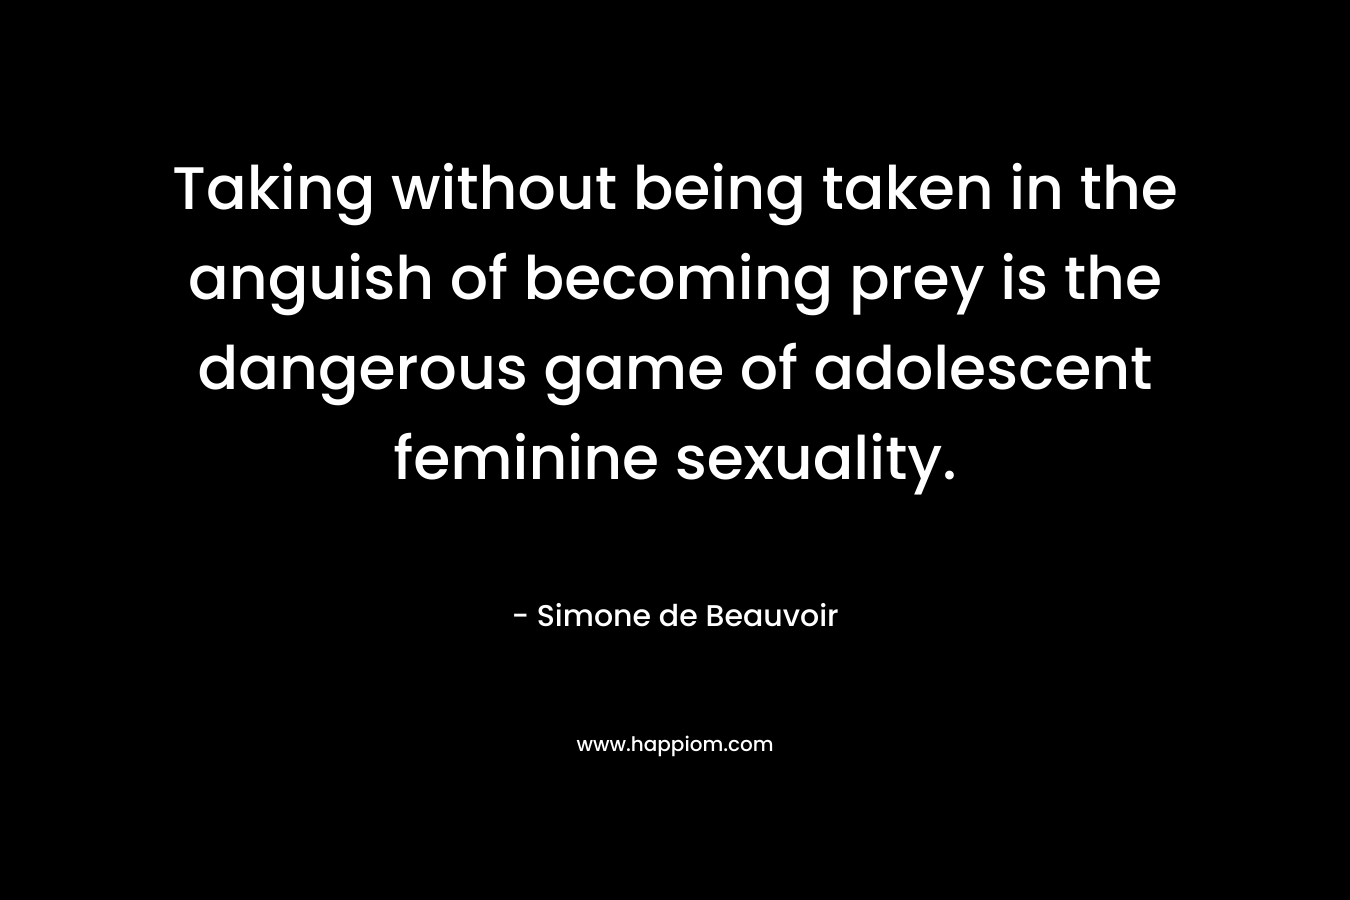 Taking without being taken in the anguish of becoming prey is the dangerous game of adolescent feminine sexuality.